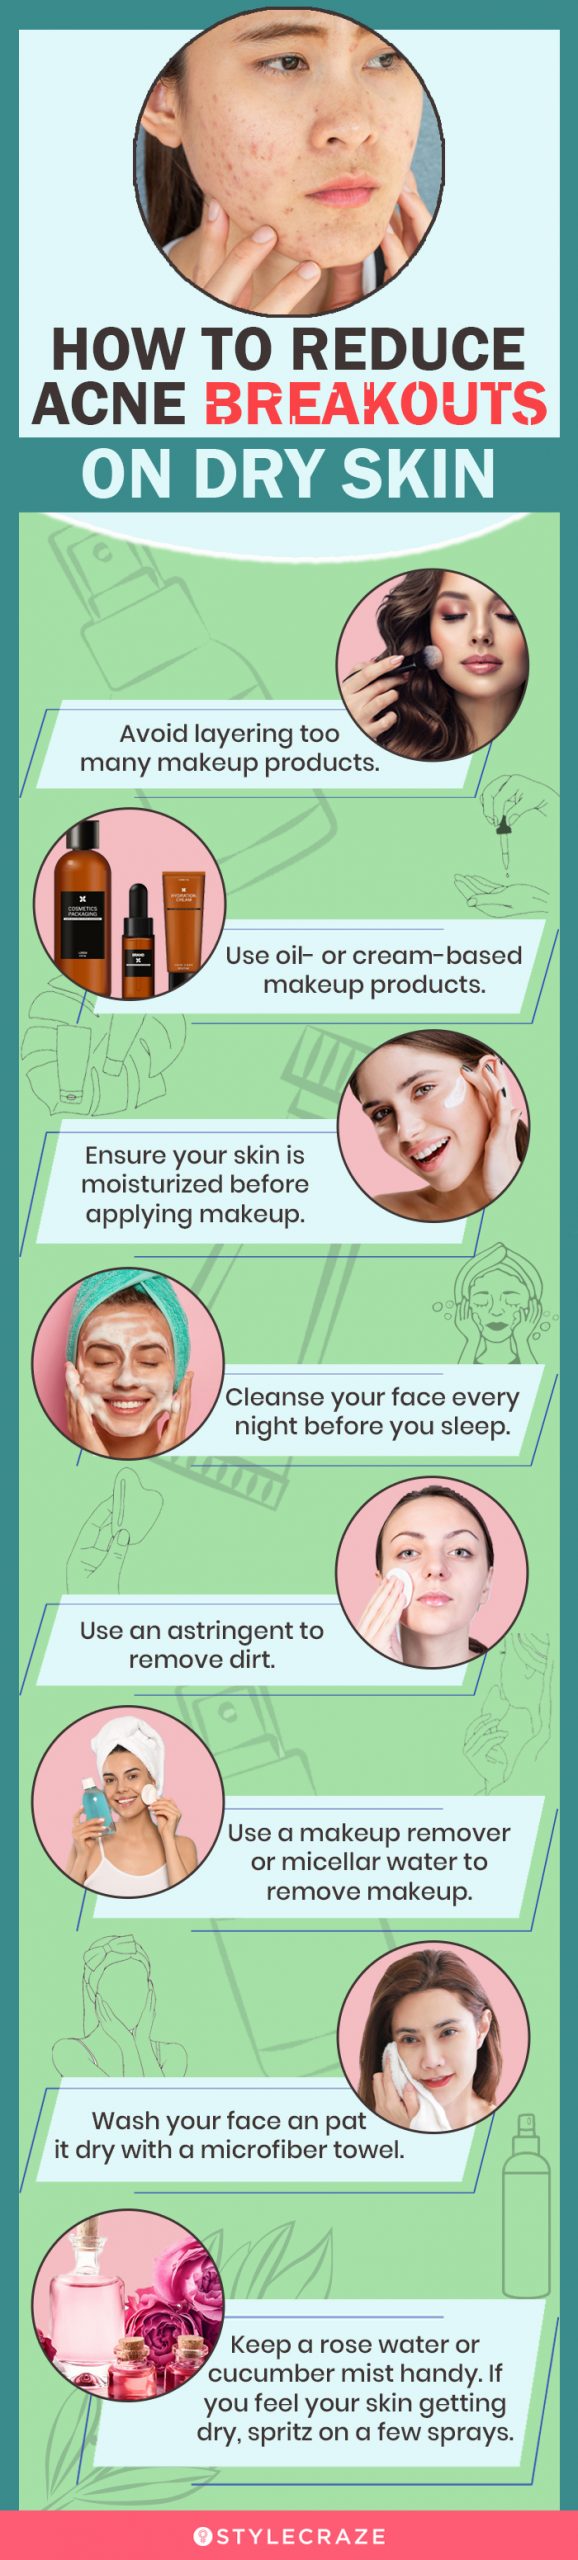 how to reduce dry skin acne breakouts (infographic)